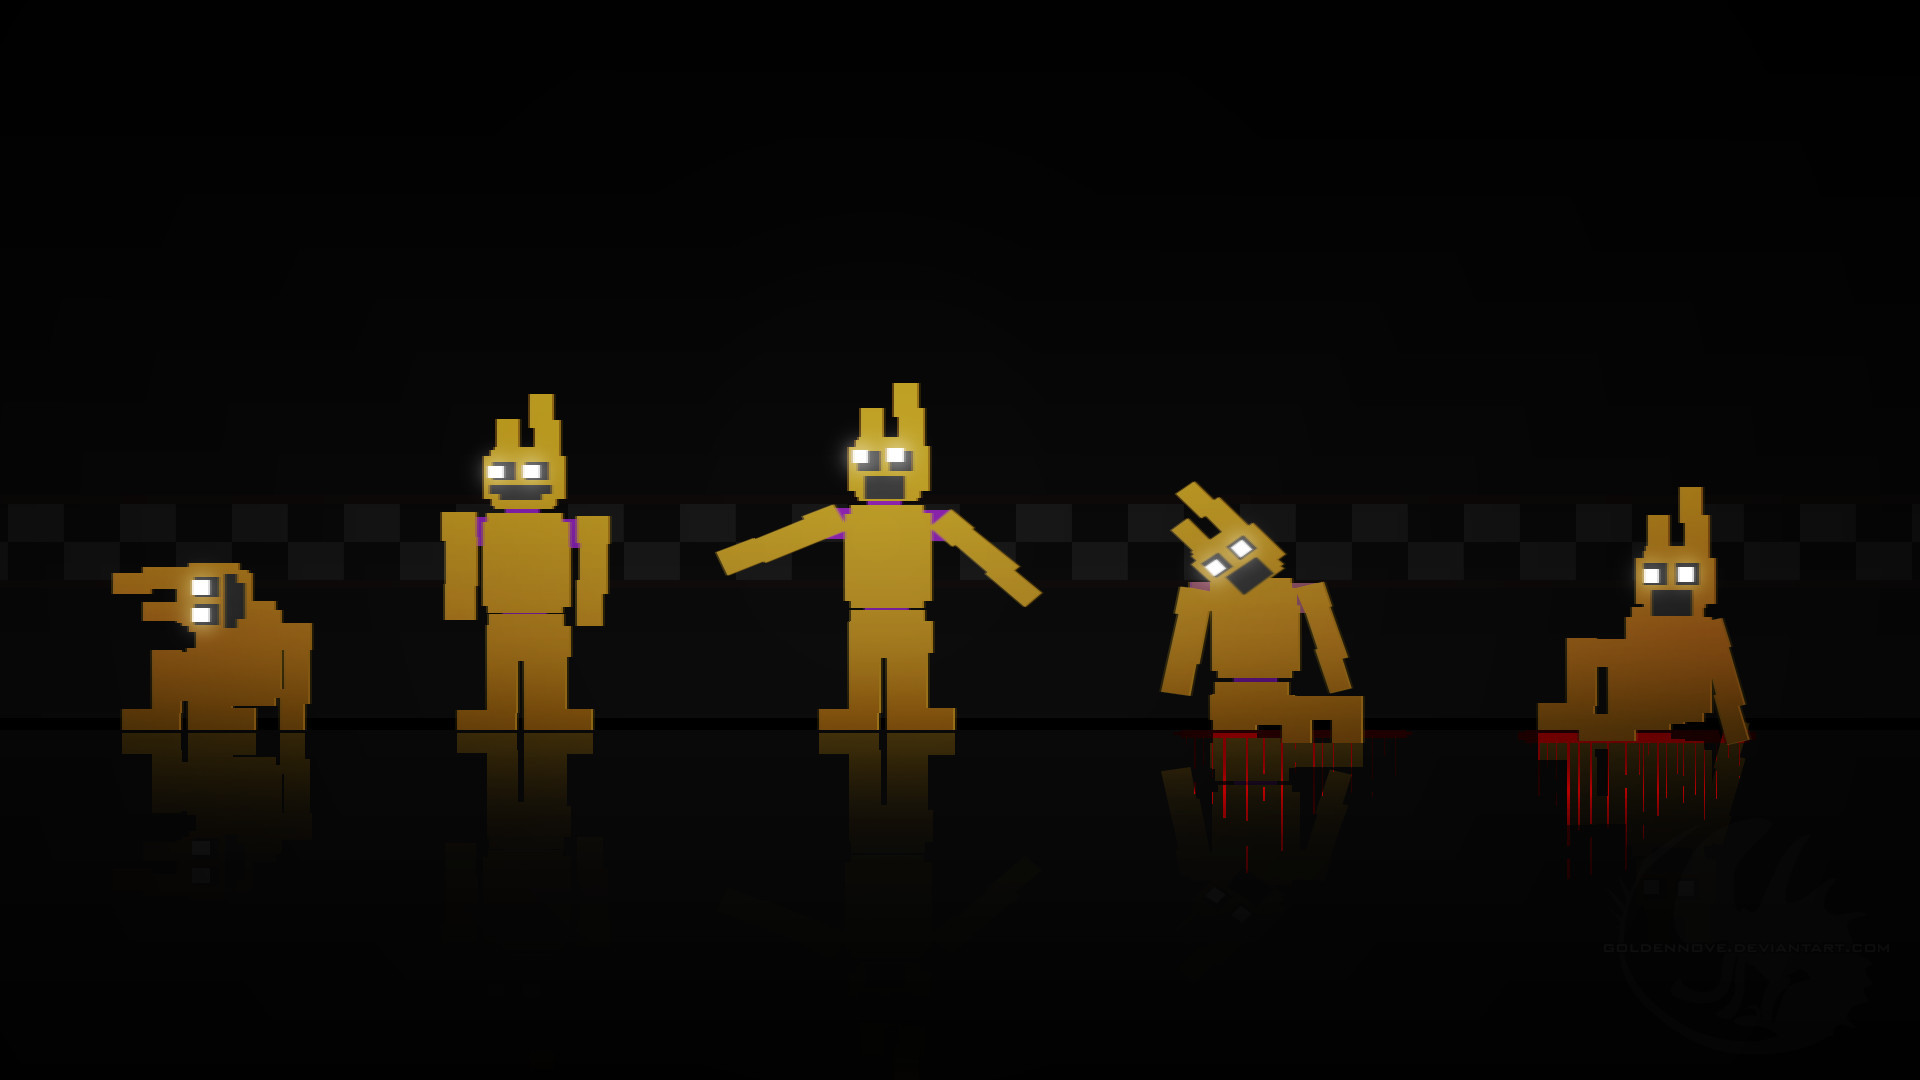 1920x1080 Five Nights at Freddy's 3 - wallpaper by GoldenNove